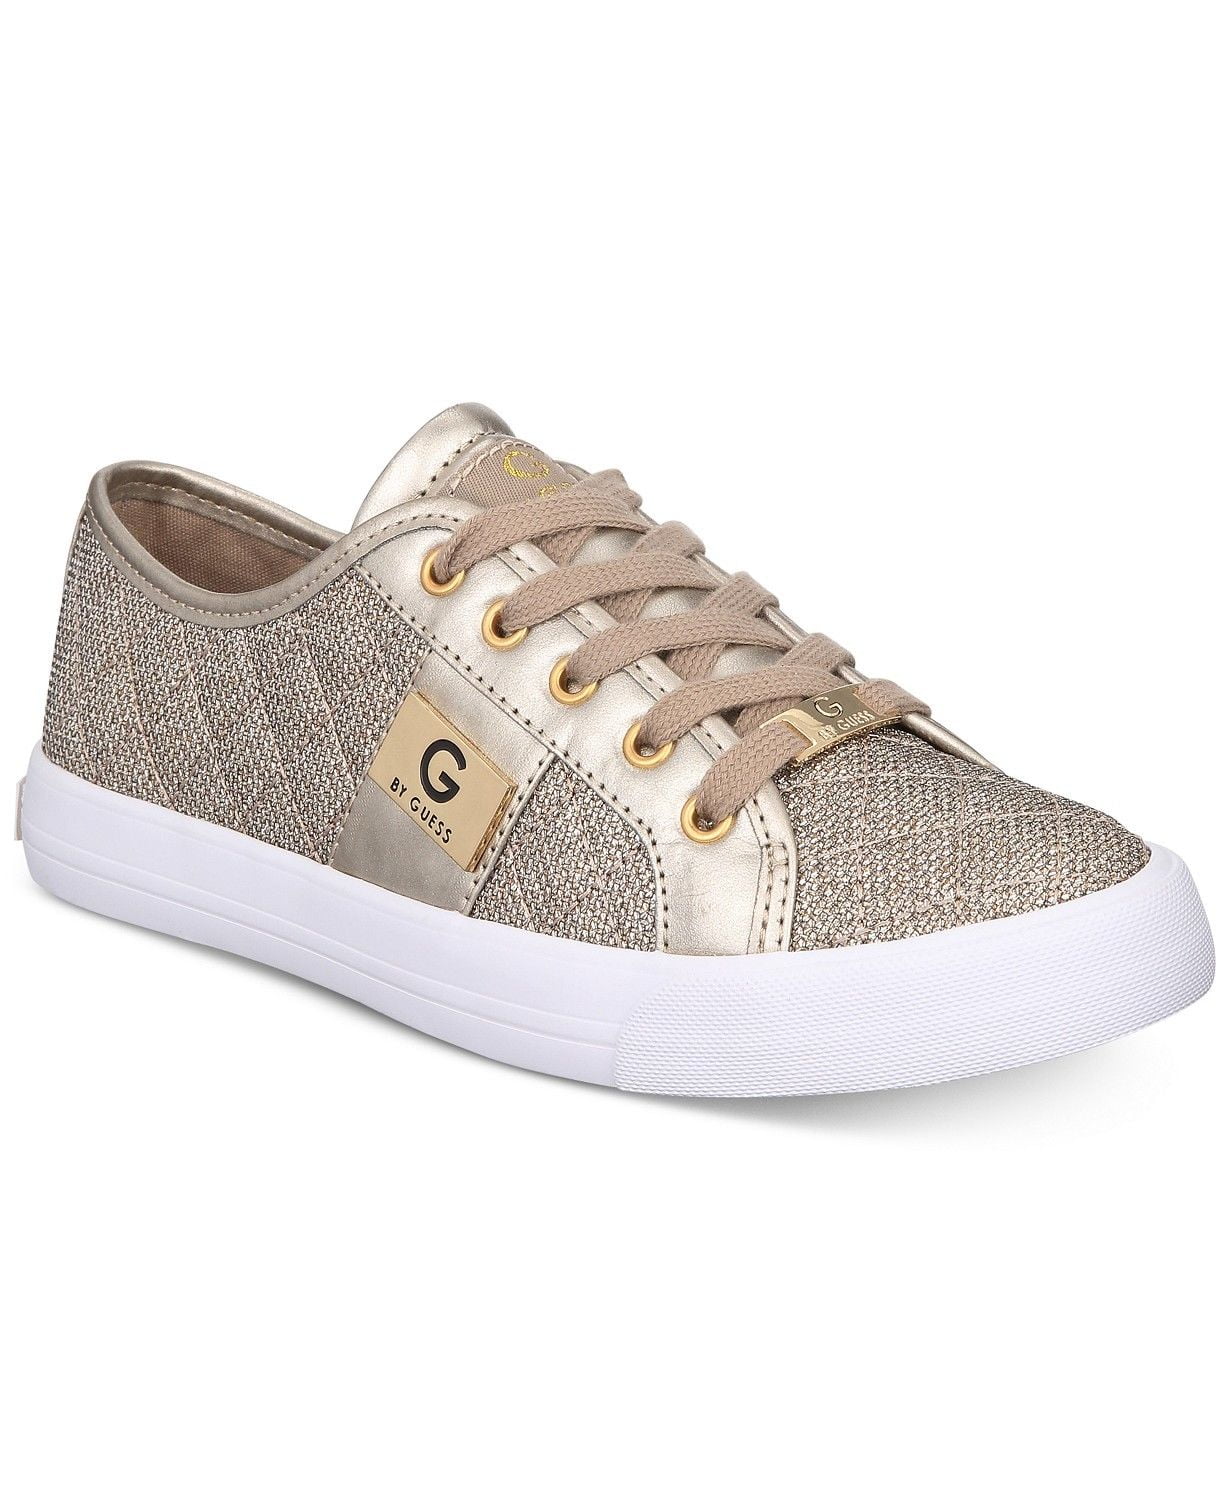 Leeds Optimistisch Reproduceren G by Guess Women's Lace Up Leather Quilted Fabric Glitter Sneakers Shoes  Gold (6) - Walmart.com